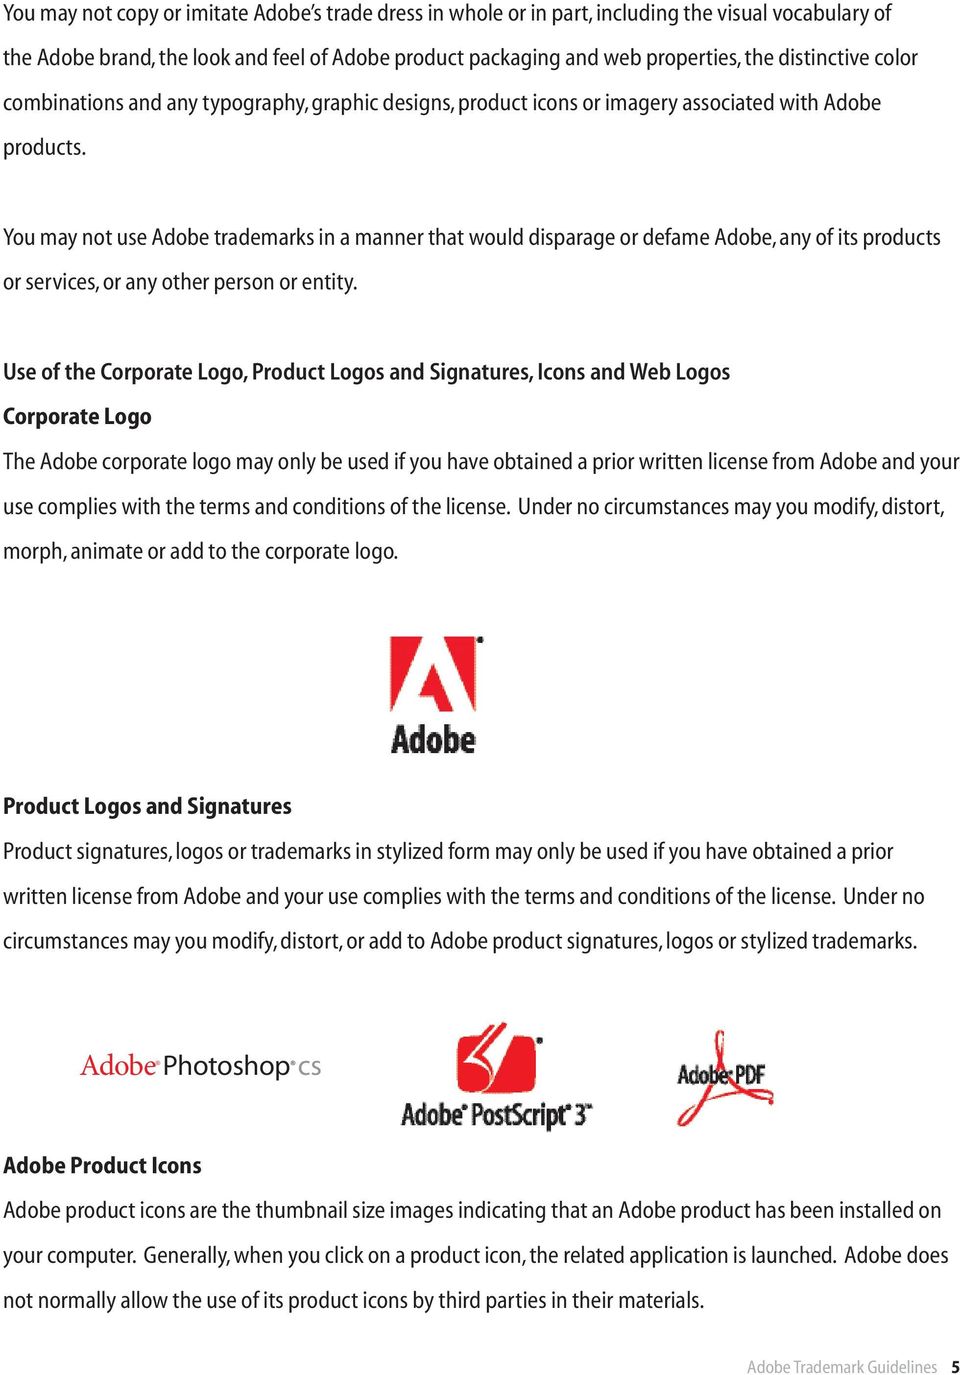 You may not use Adobe trademarks in a manner that would disparage or defame Adobe, any of its products or services, or any other person or entity.